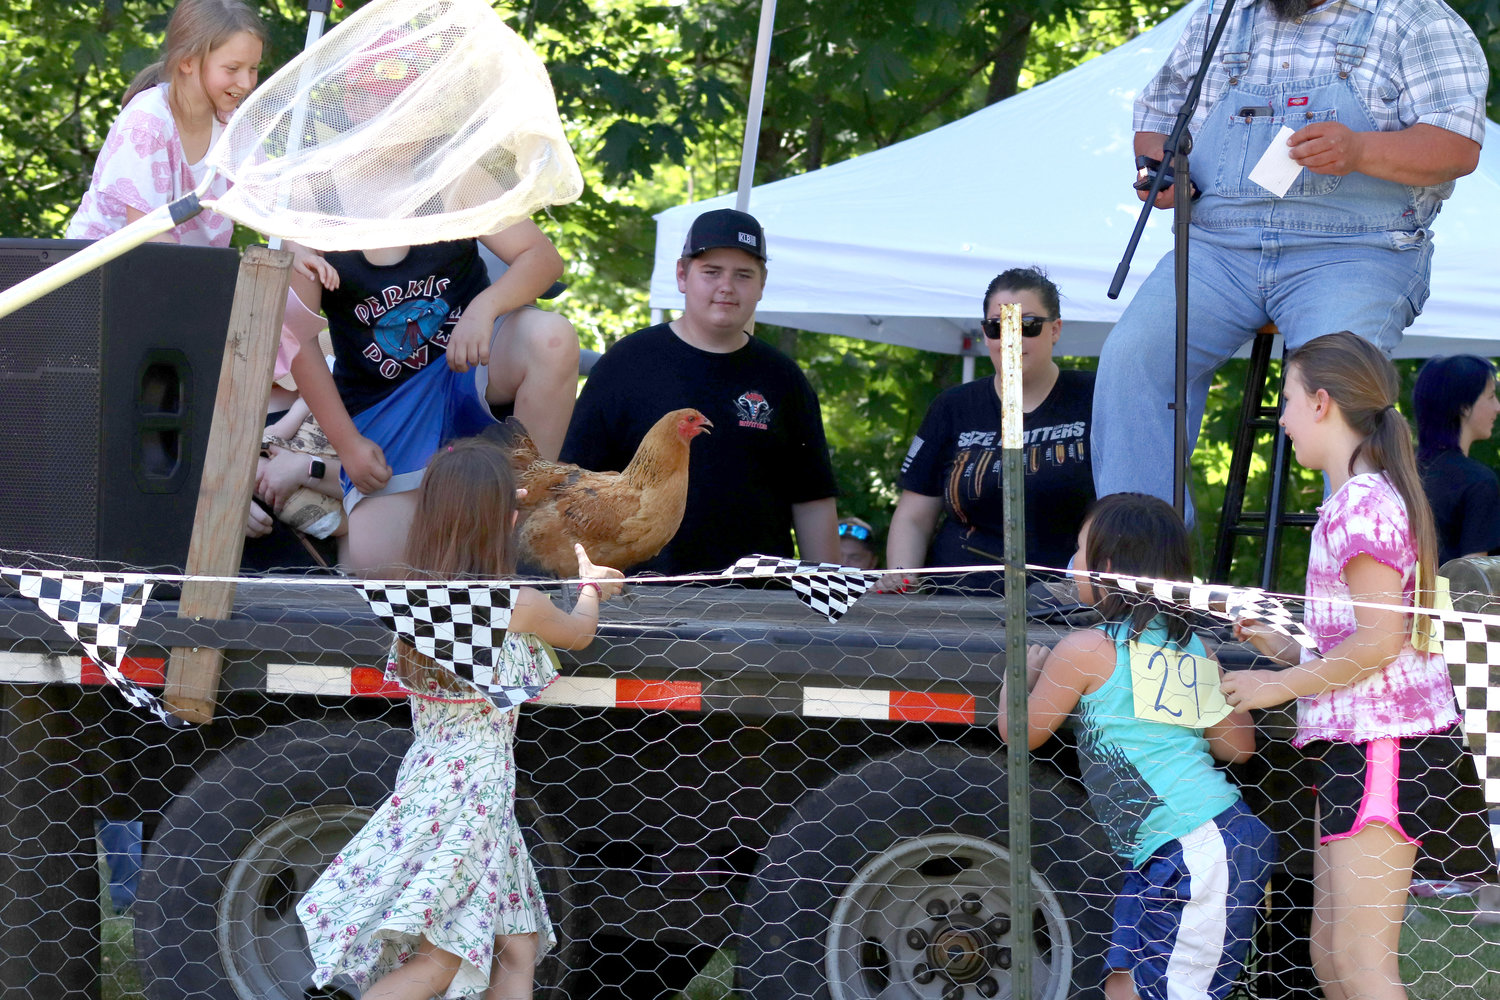 Kids chase after a runaway chicken who made its way onto the stage during Independence Valley Community Hall’s 42nd Annual Chicken Races in Rochester on Sunday. No chickens were harmed during the event, which is a fundraiser for Independence Valley Community Hall.